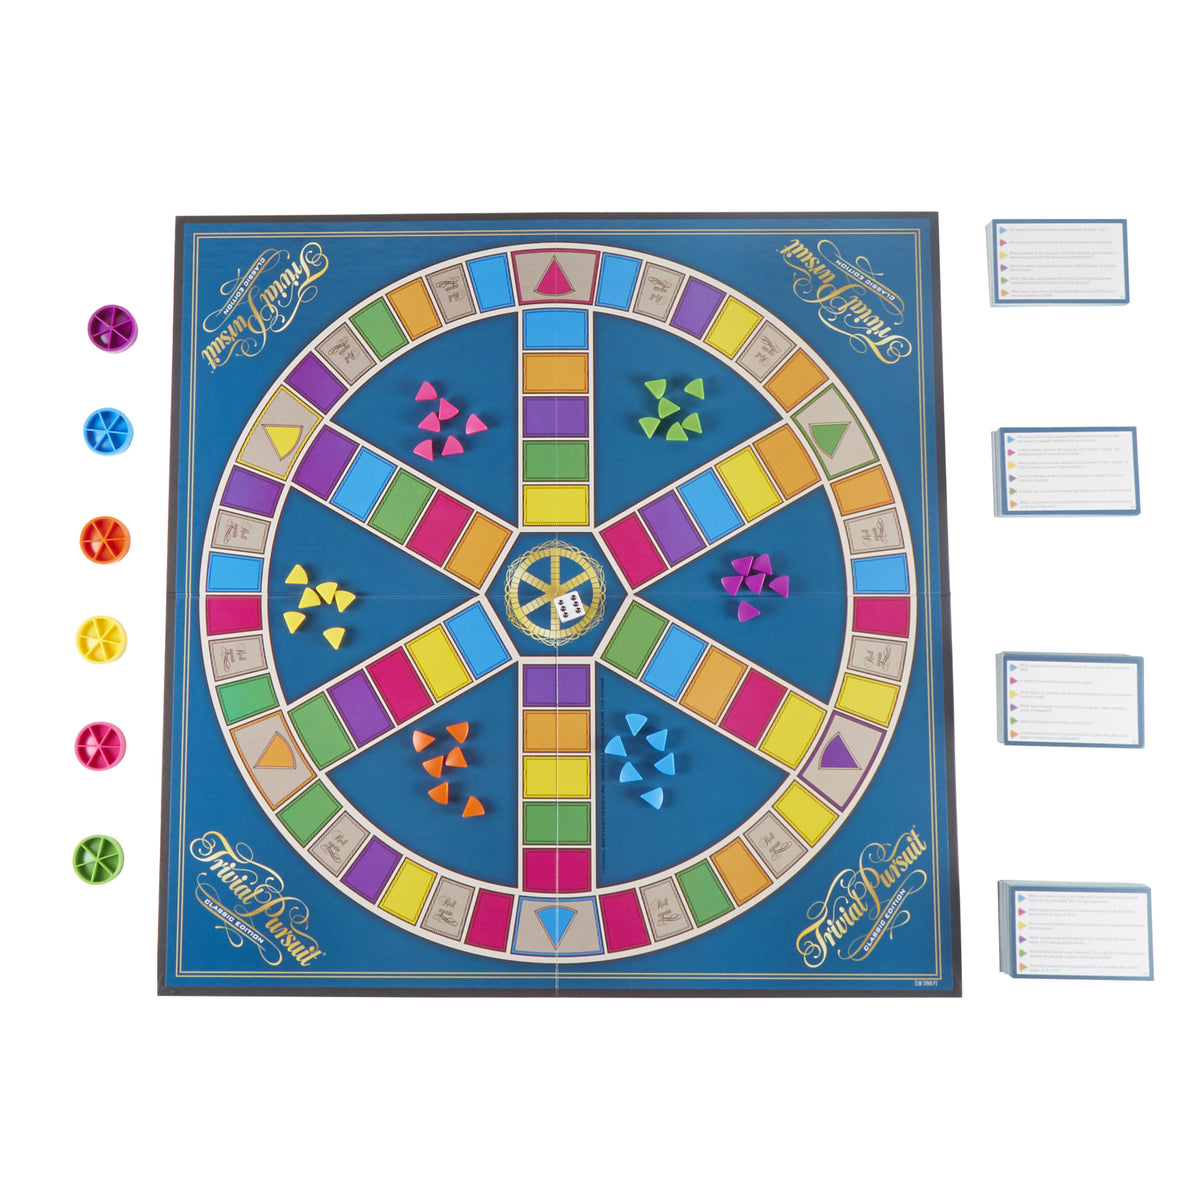 Trivial Pursuit Game: Classic Edition : Target